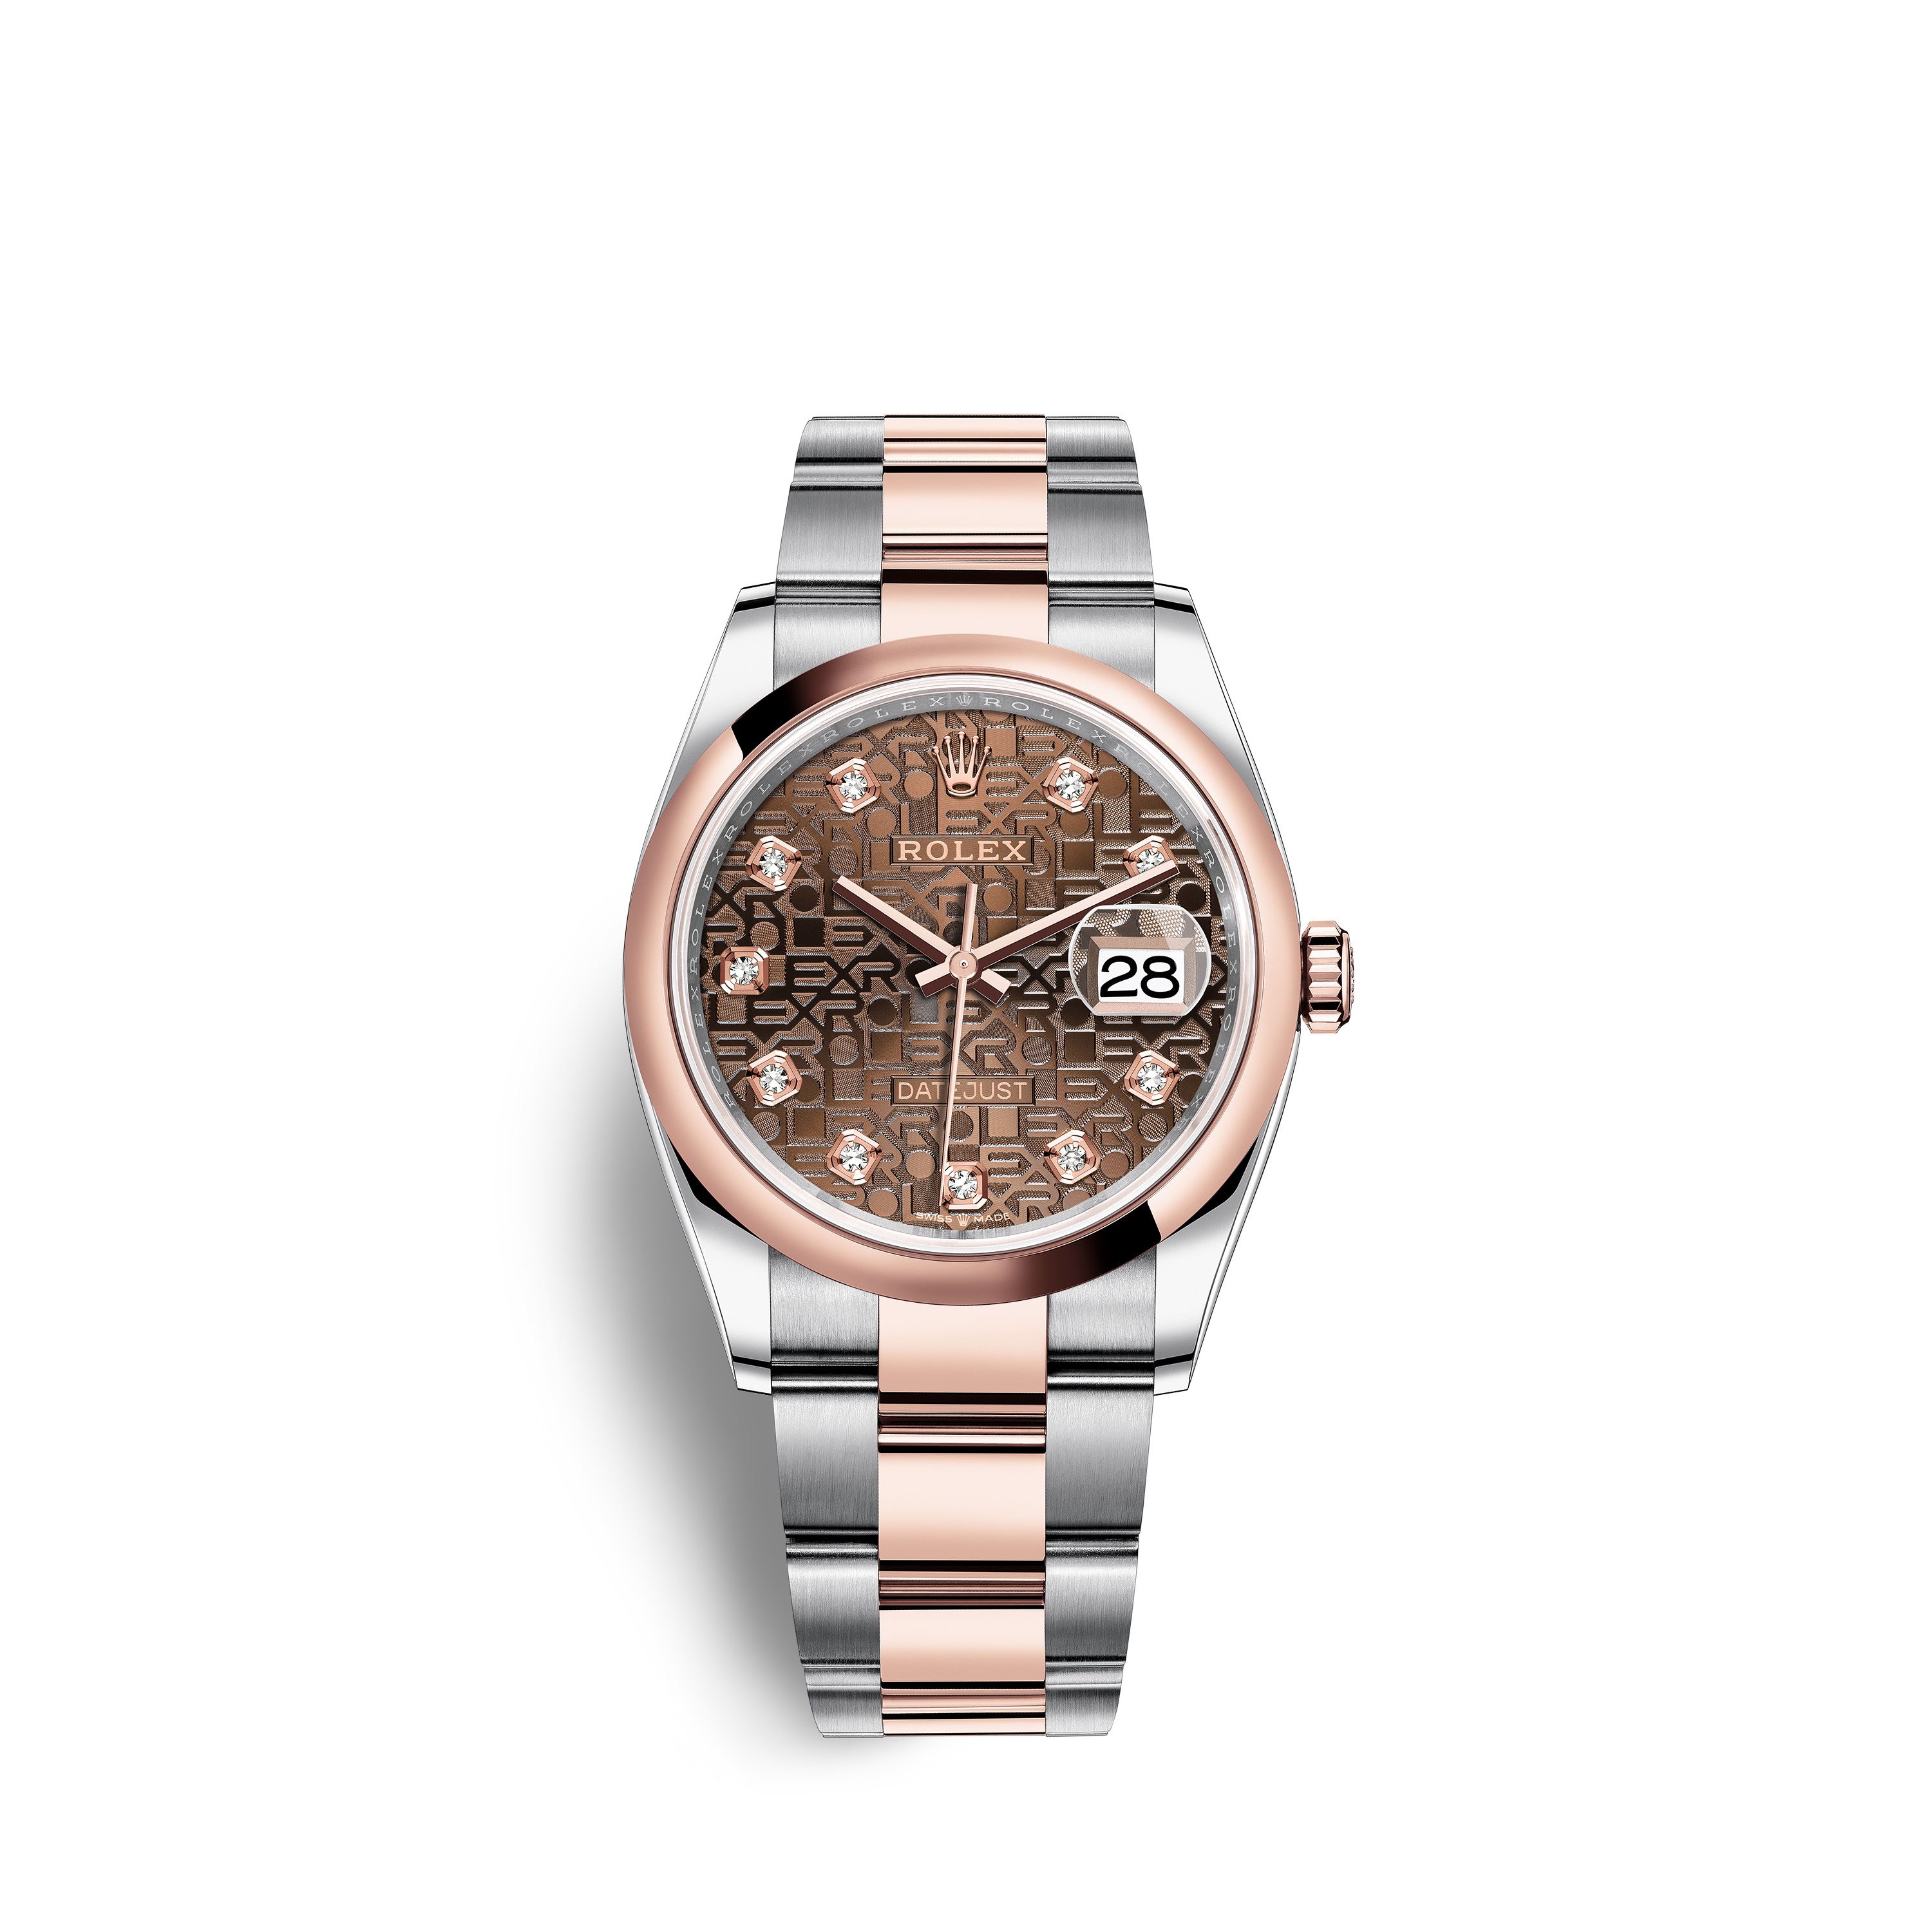 Datejust 36 126201 Rose Gold & Stainless Steel Watch (Chocolate Jubilee Design Set with Diamonds)